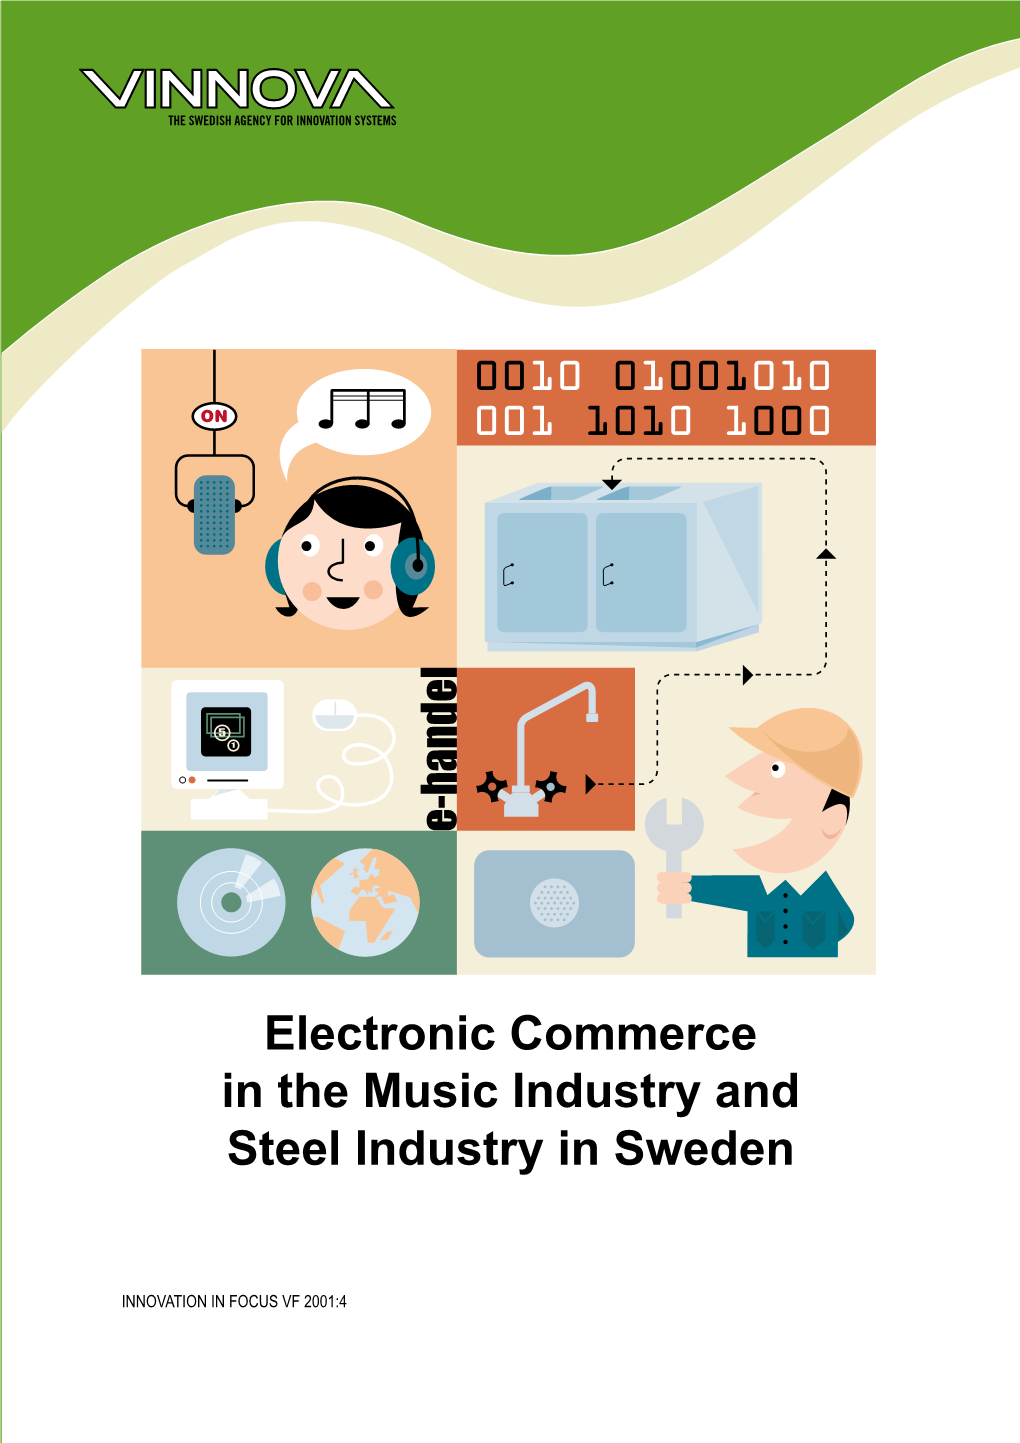 Electronic Commerce in the Music Industry and Steel Industry in Sweden